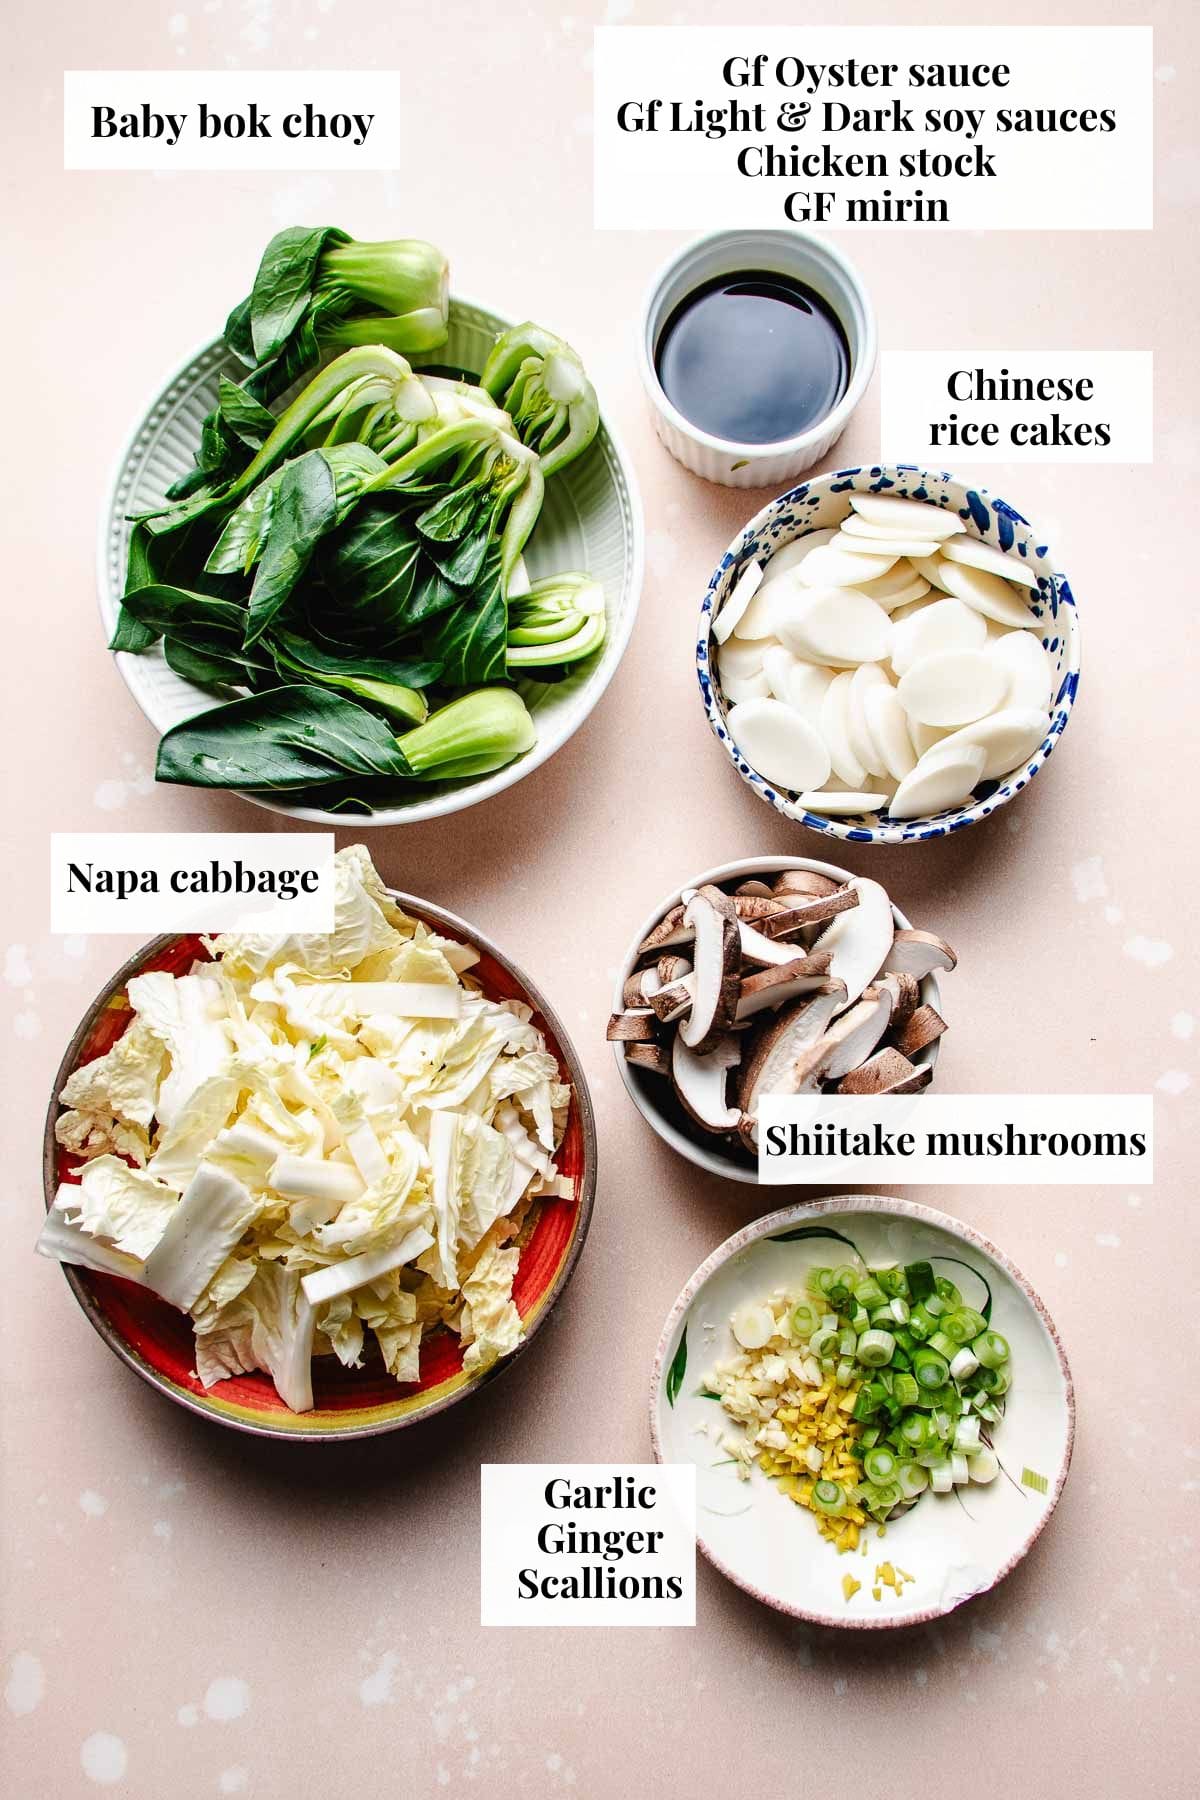 Photo shows ingredients needed to make Chinese rice cake stir fry.